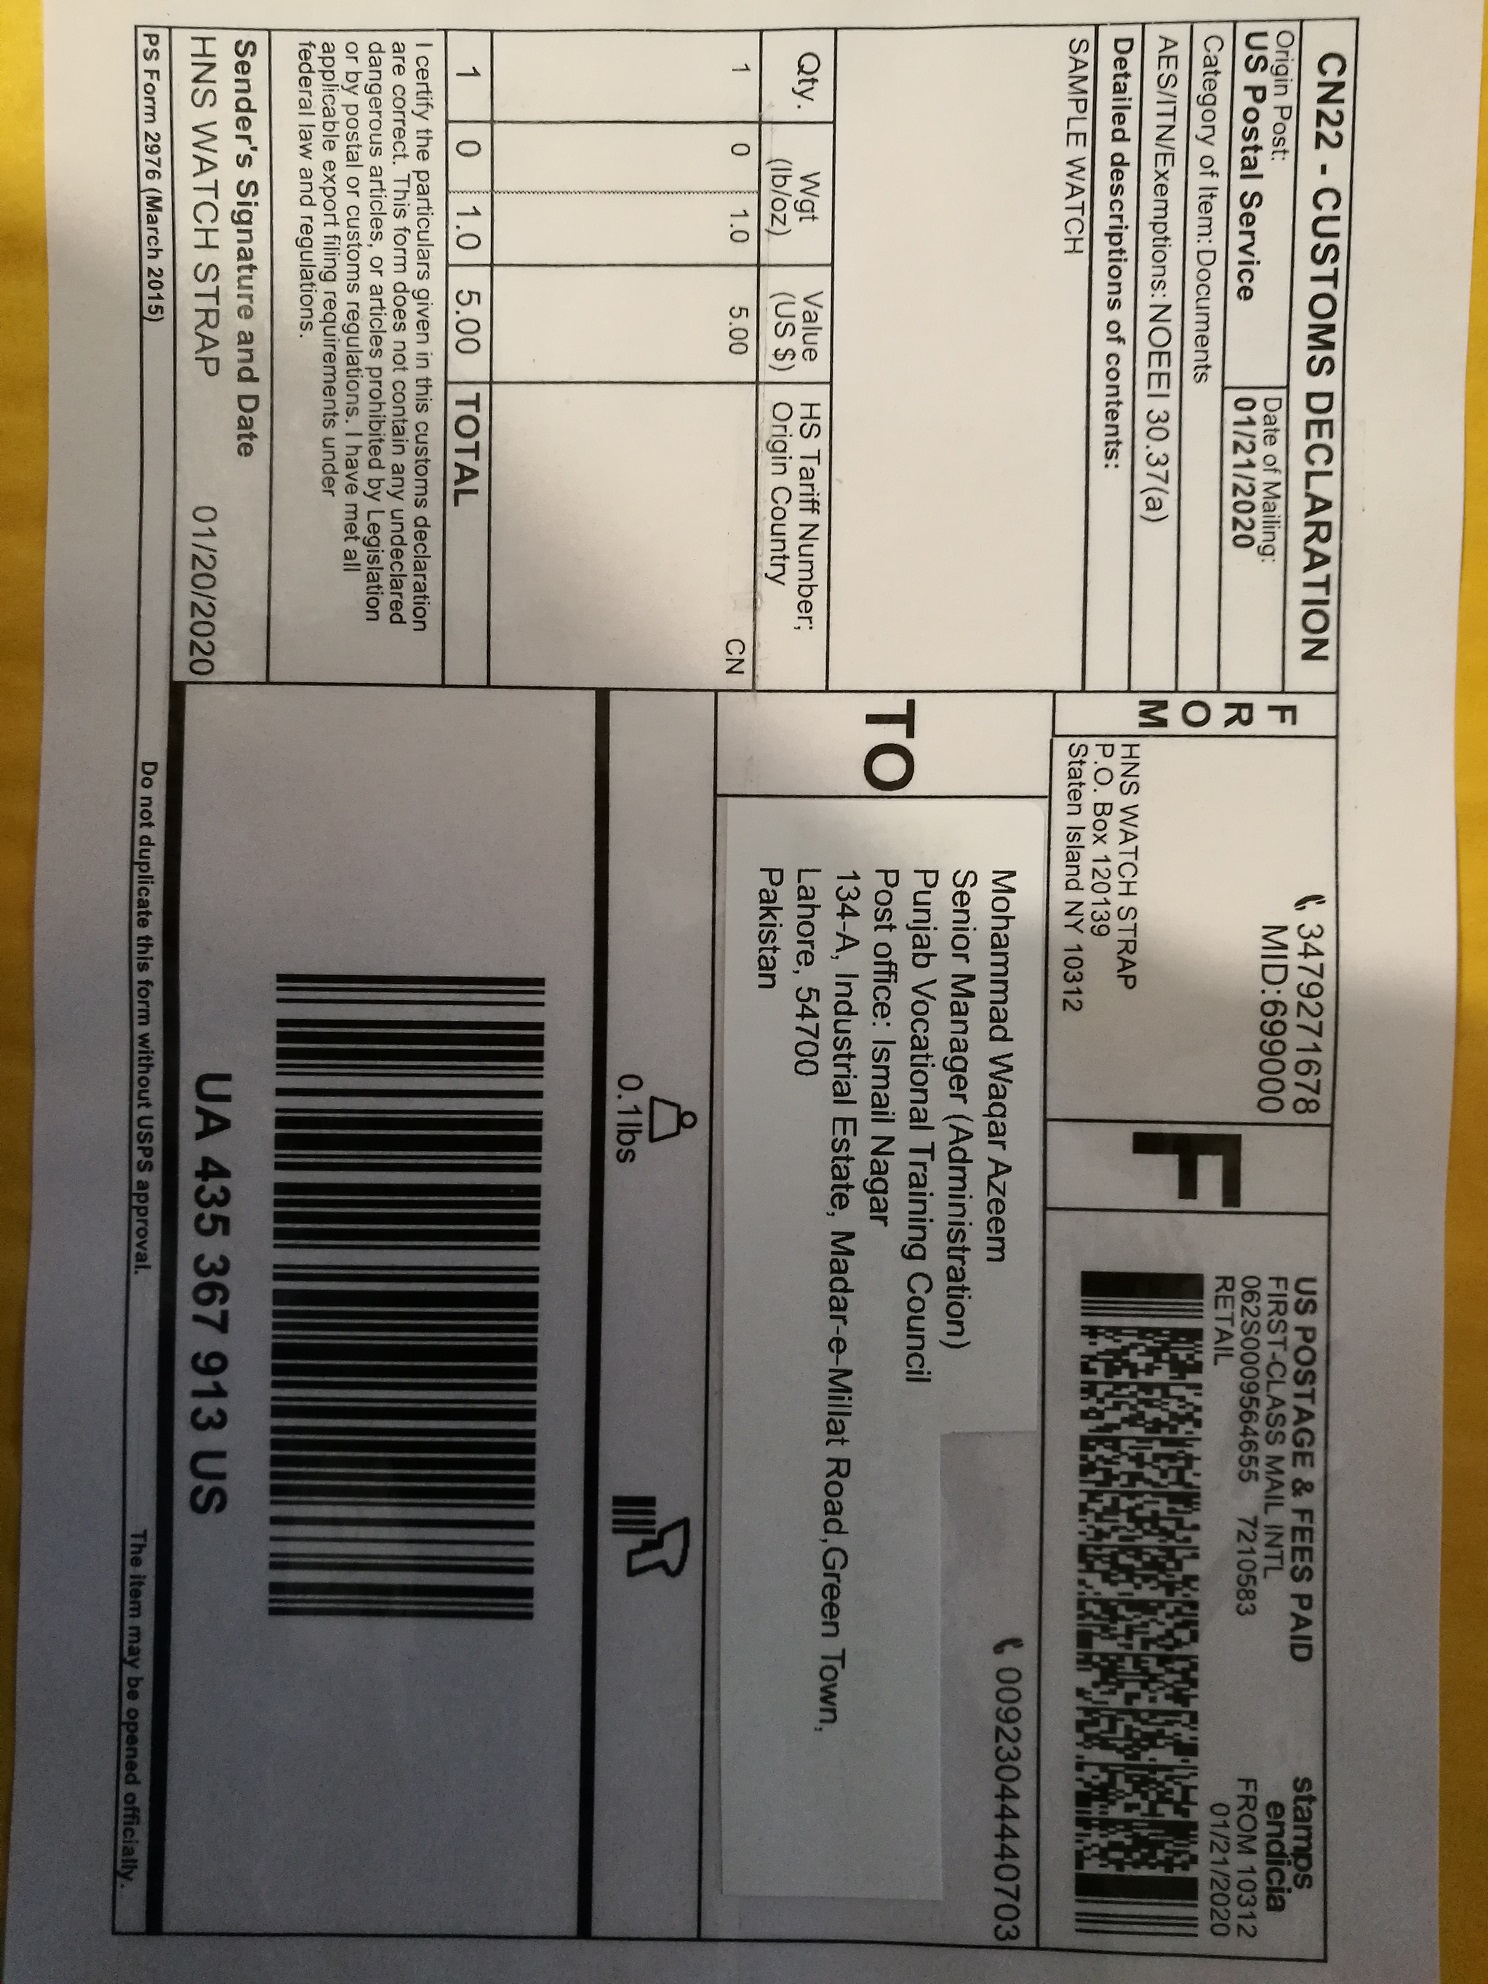 USPS Booking Receipt For Less Ordered Item Value